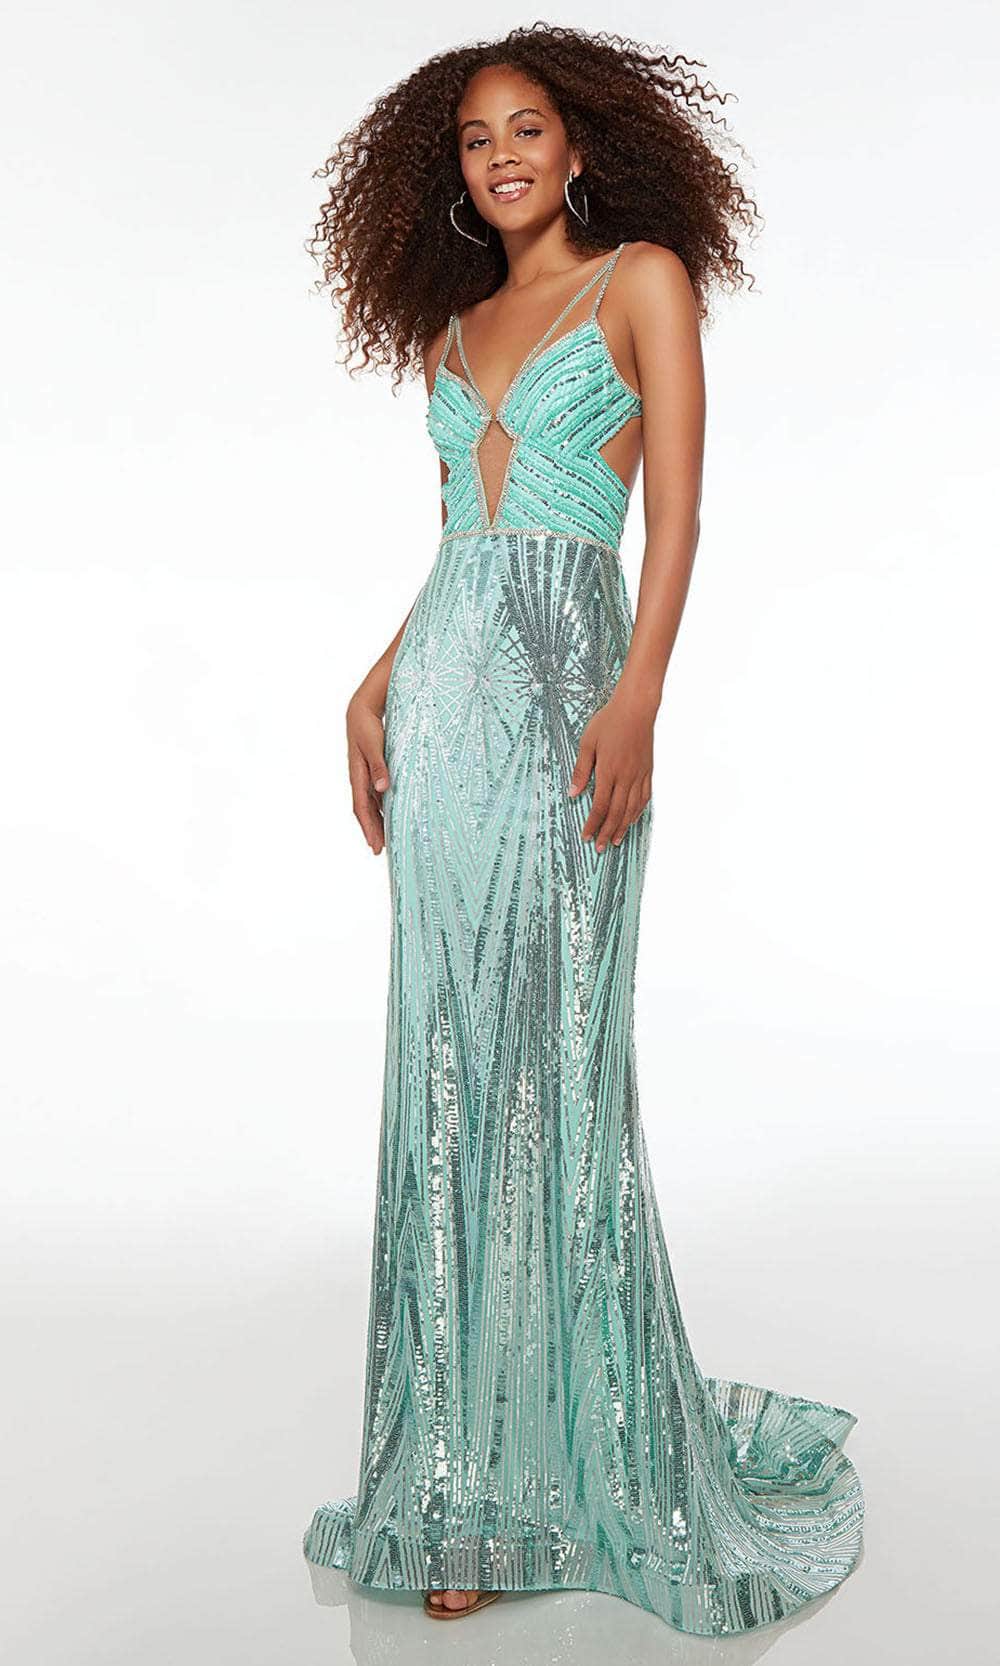 Image of Alyce Paris 61679 - Sequin Embellished Side Cut-Out Detail Prom Dress